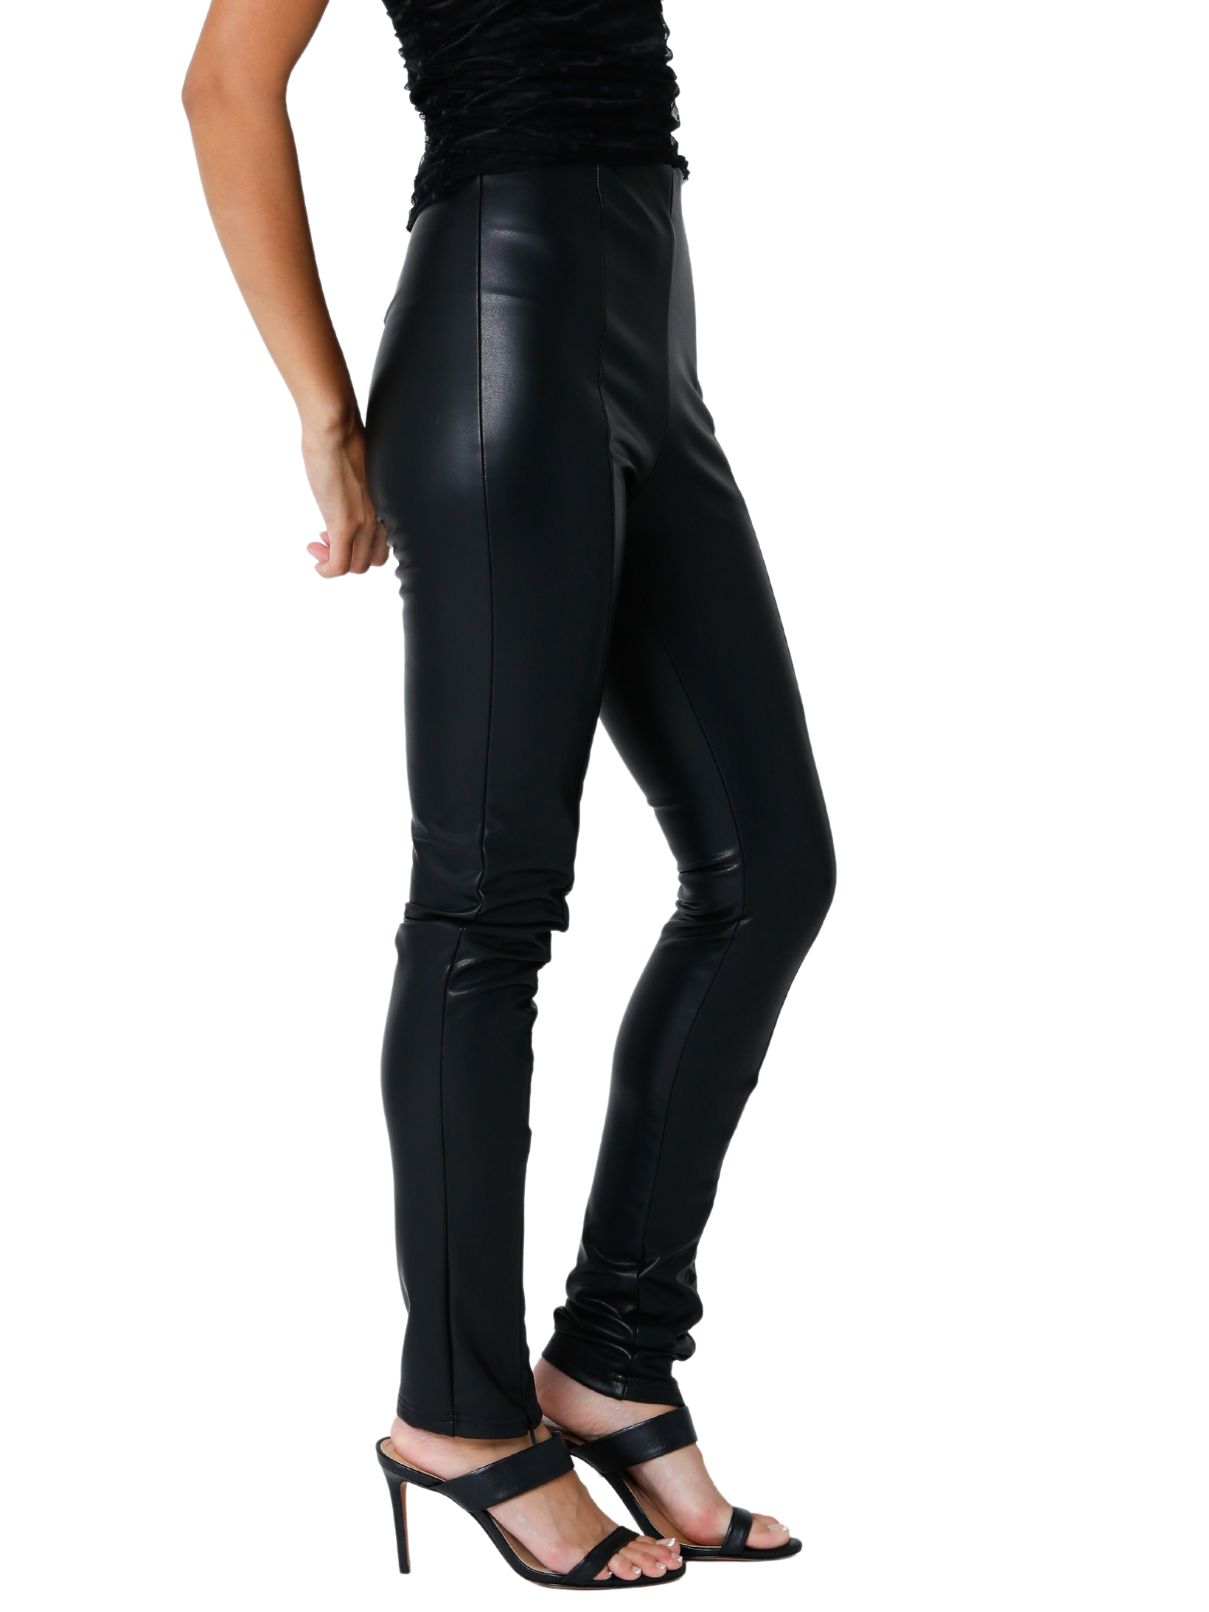 Faux Leather Leggings in Black  Cotton Island Women's Clothing